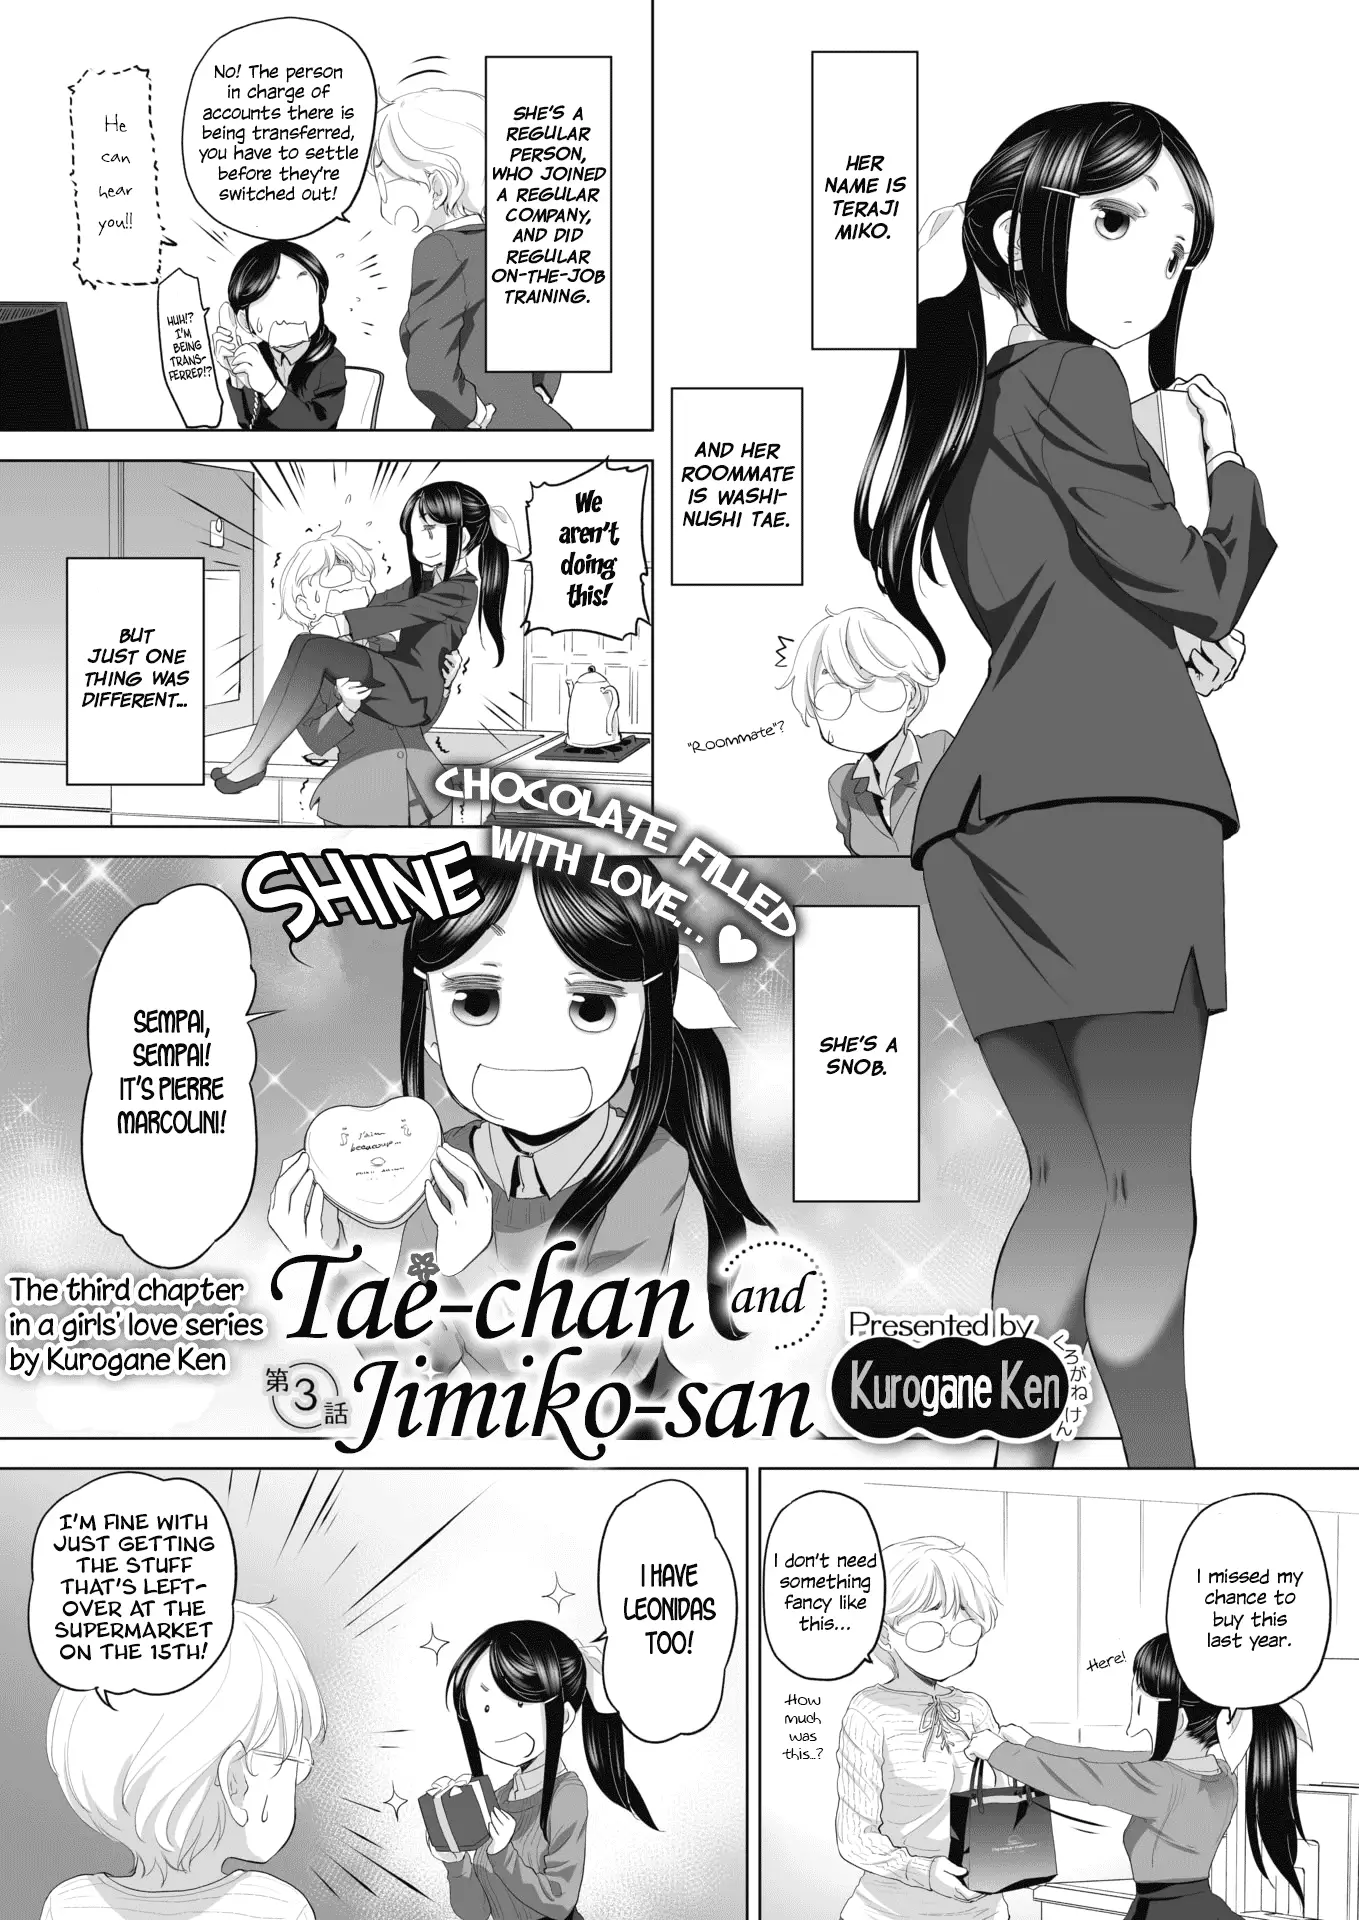 Tae-chan and Jimiko-san - Chapter 3 Page 1